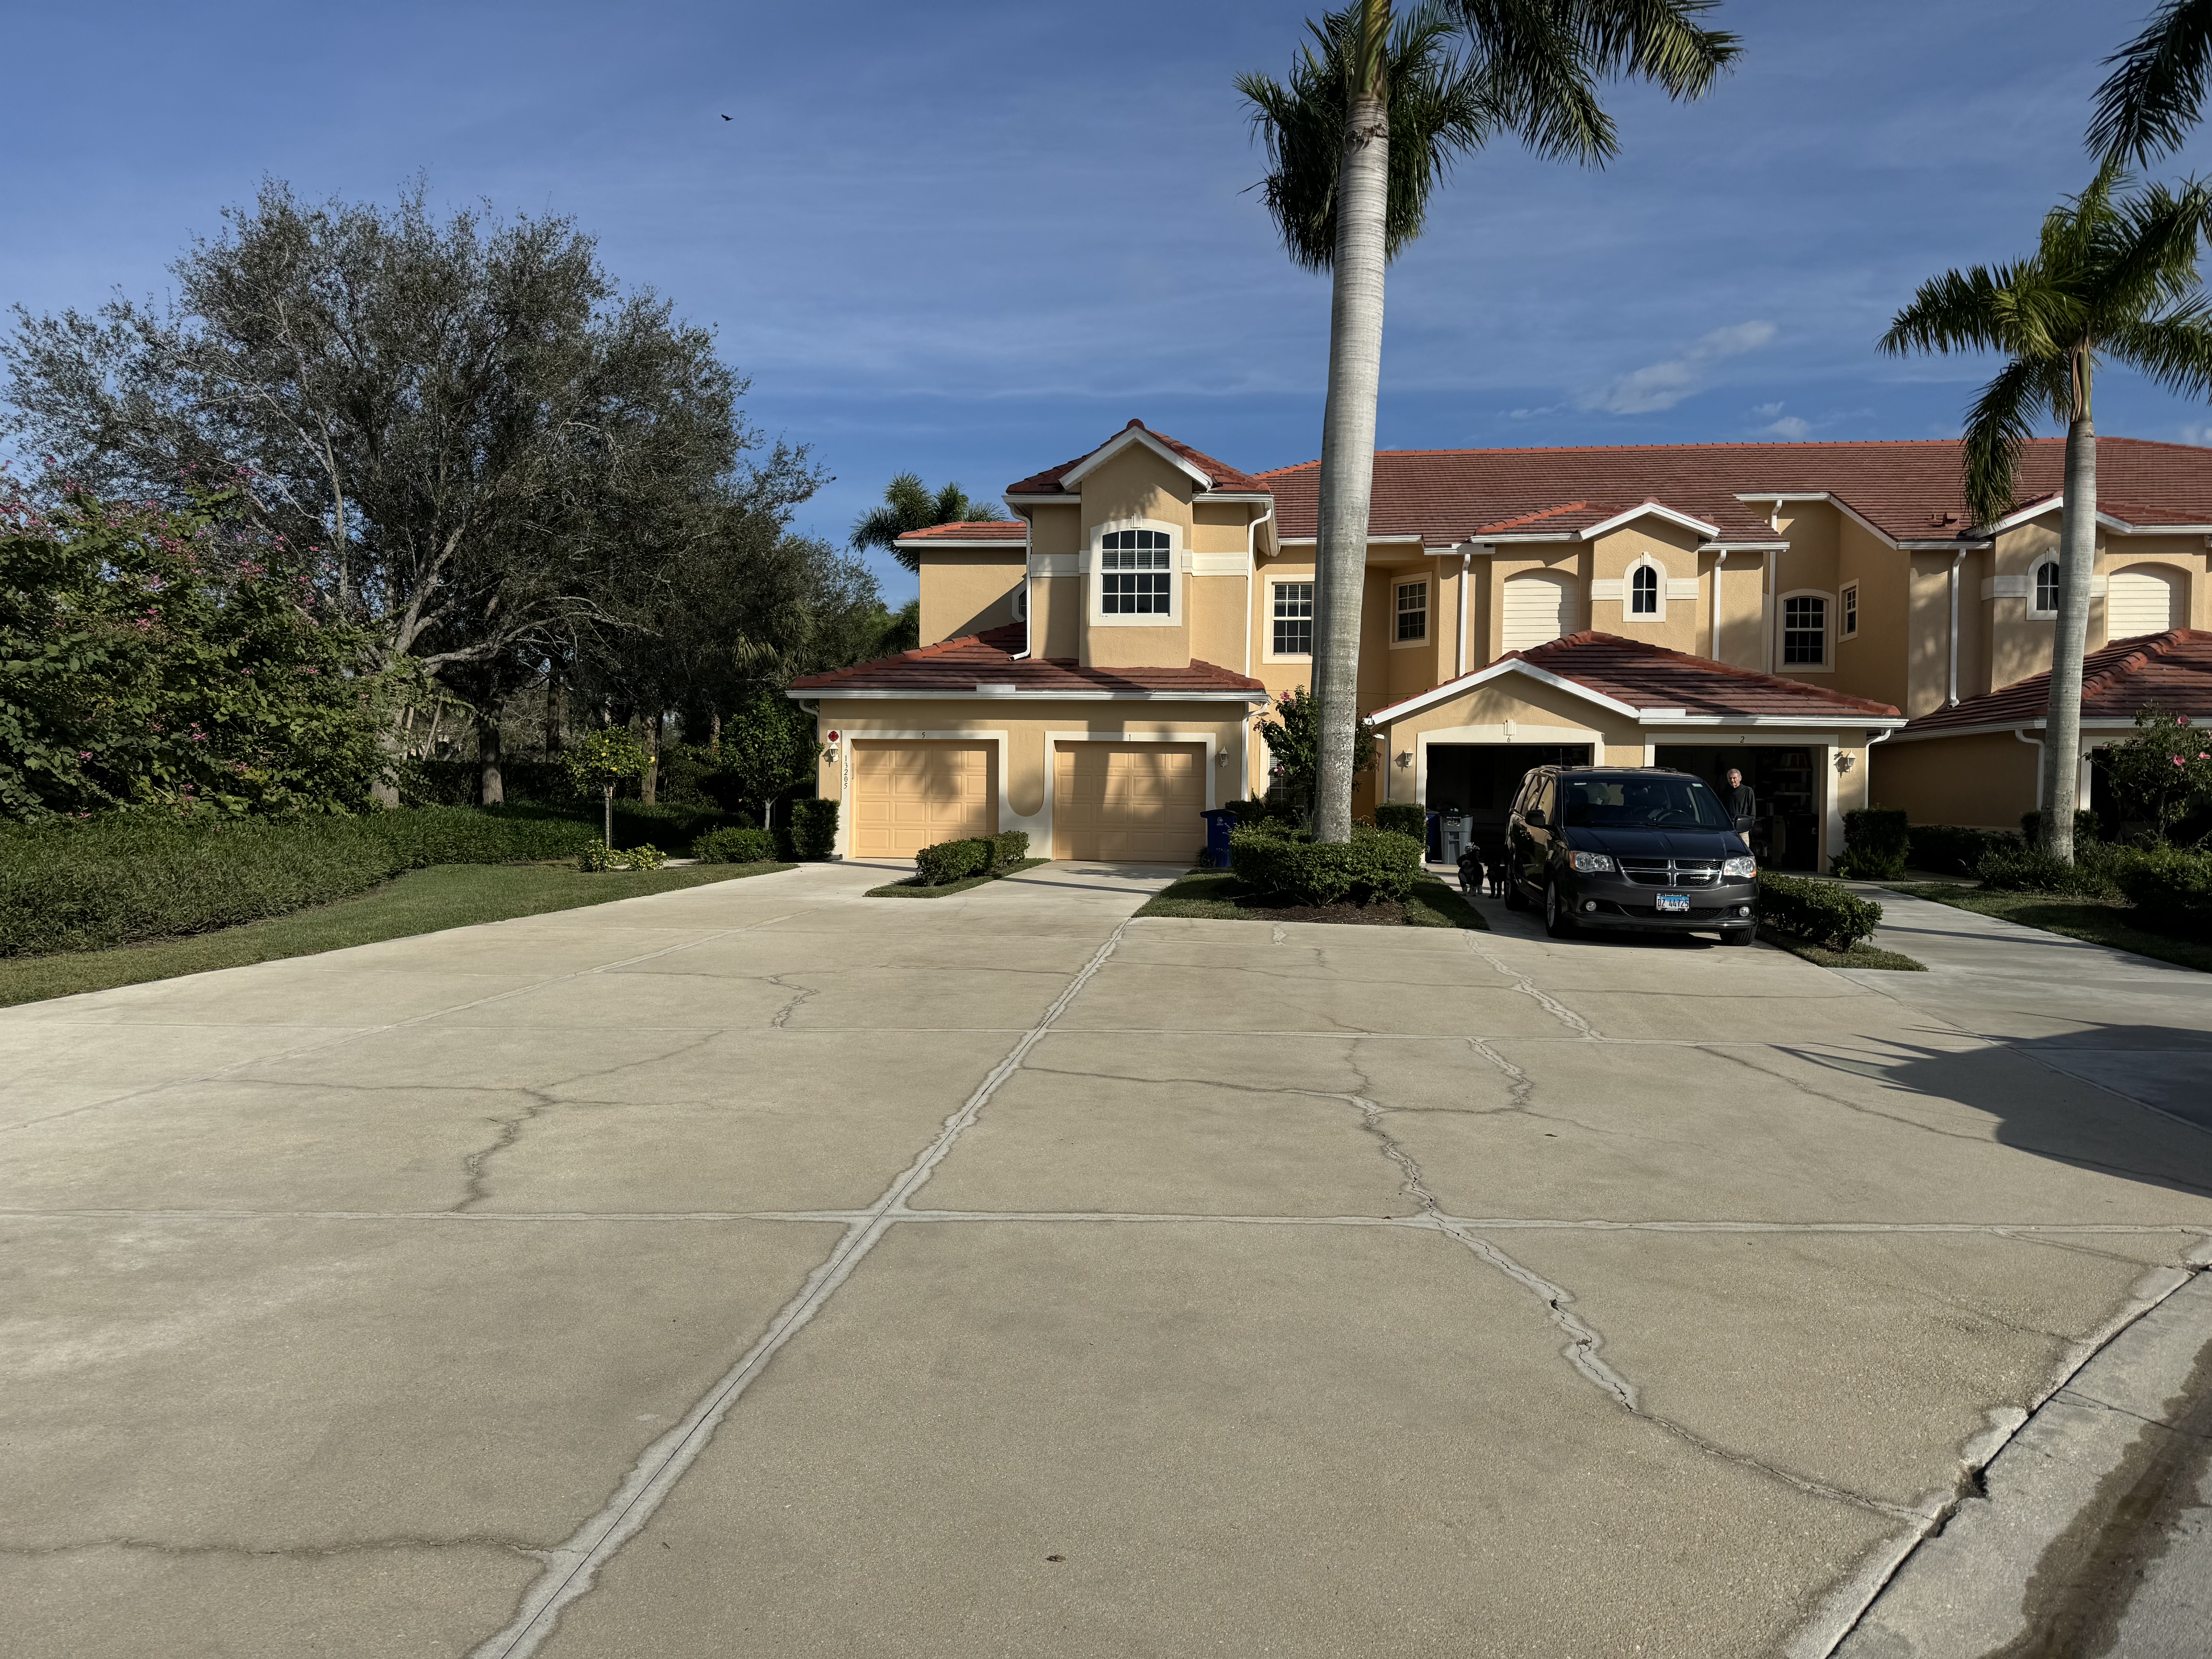 Commercial Concrete Pressure Washing in Fort Myers, Florida